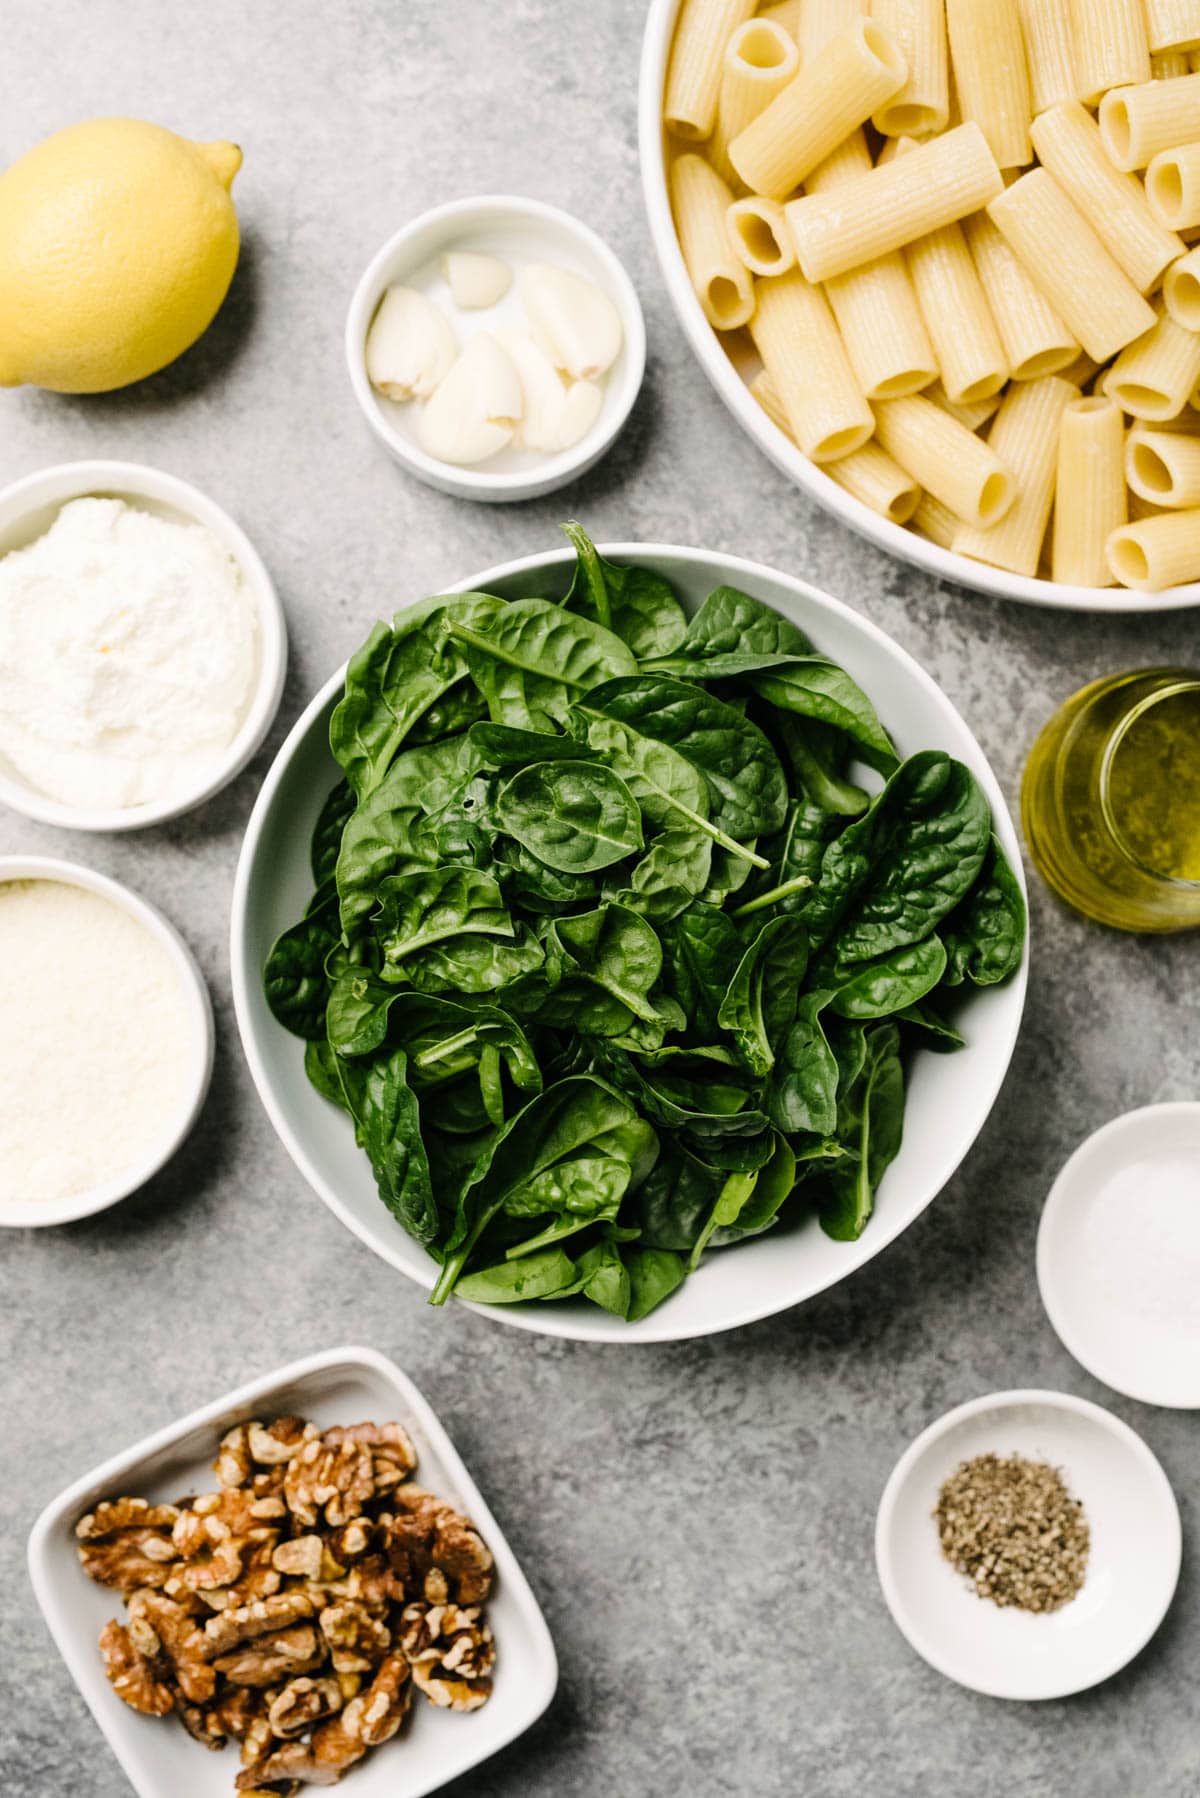 The ingredients for spinach pesto on a concrete background - baby spinach, walnuts, ricotta, parmesan, lemon, garlic, salt, pepper, olive oil and cooked pasta.